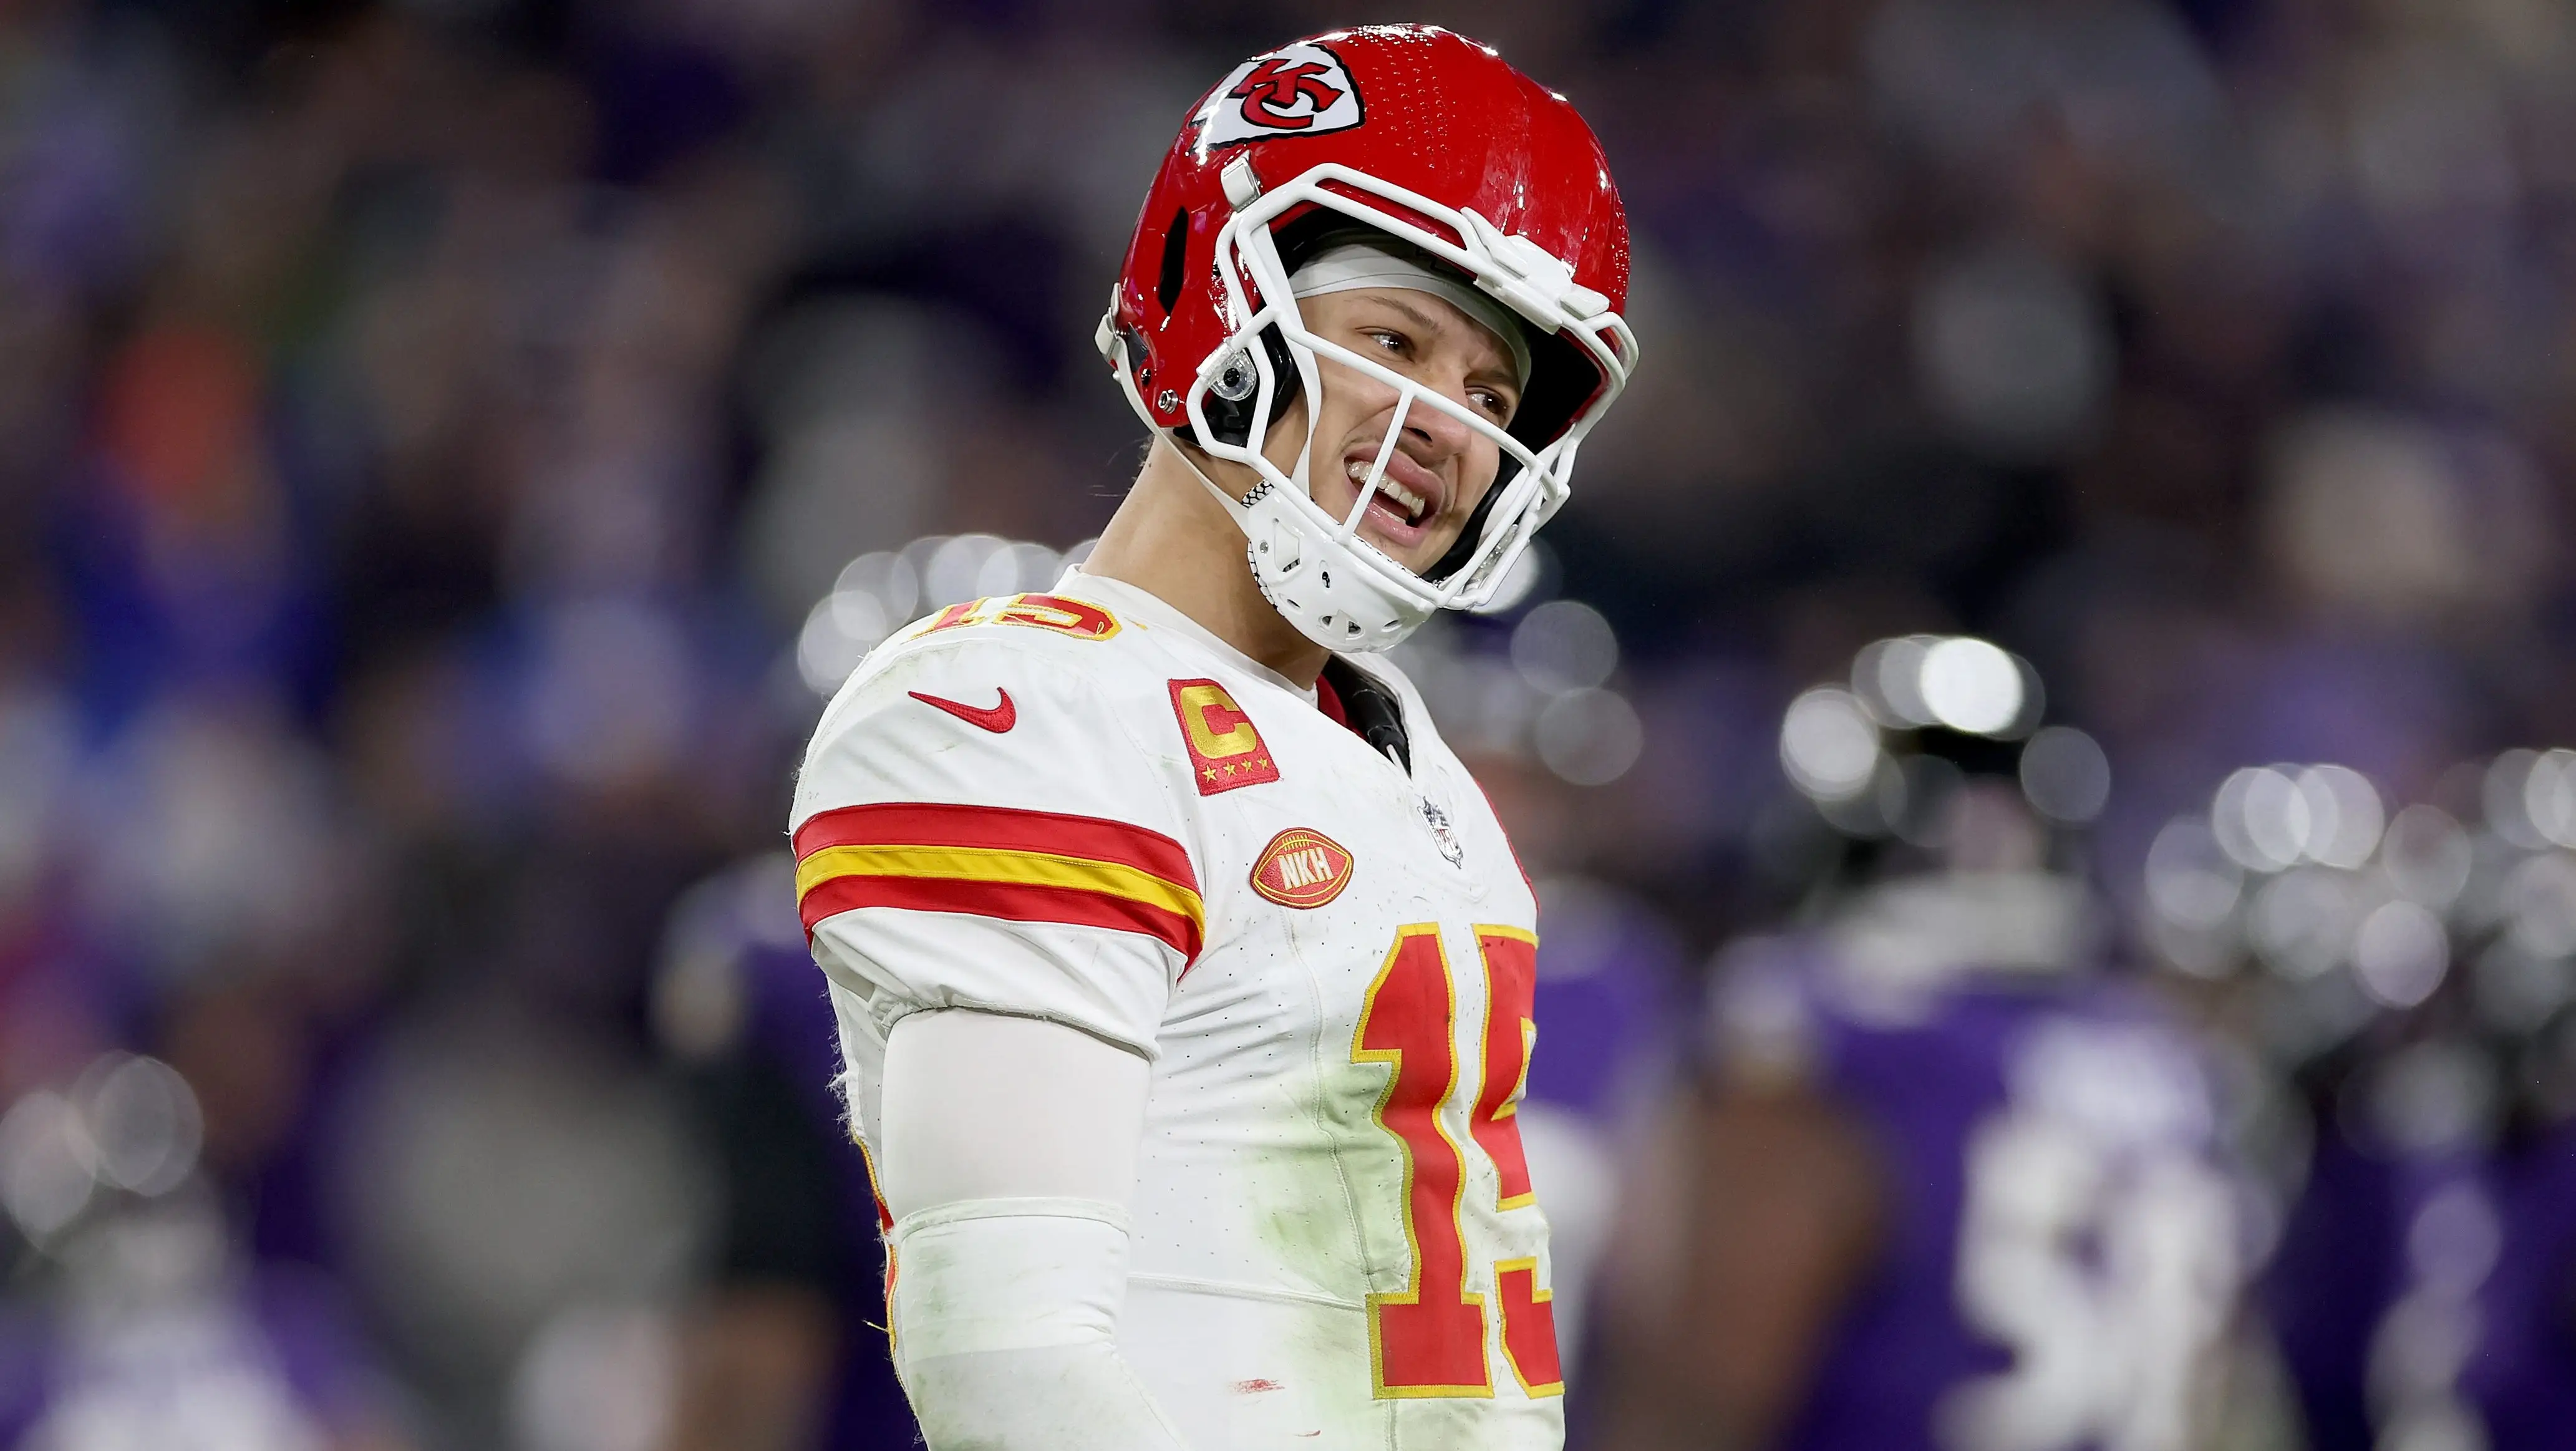 patrick-mahomes-game-worn-jersey-sets-record-sells-for-213k-at-auction